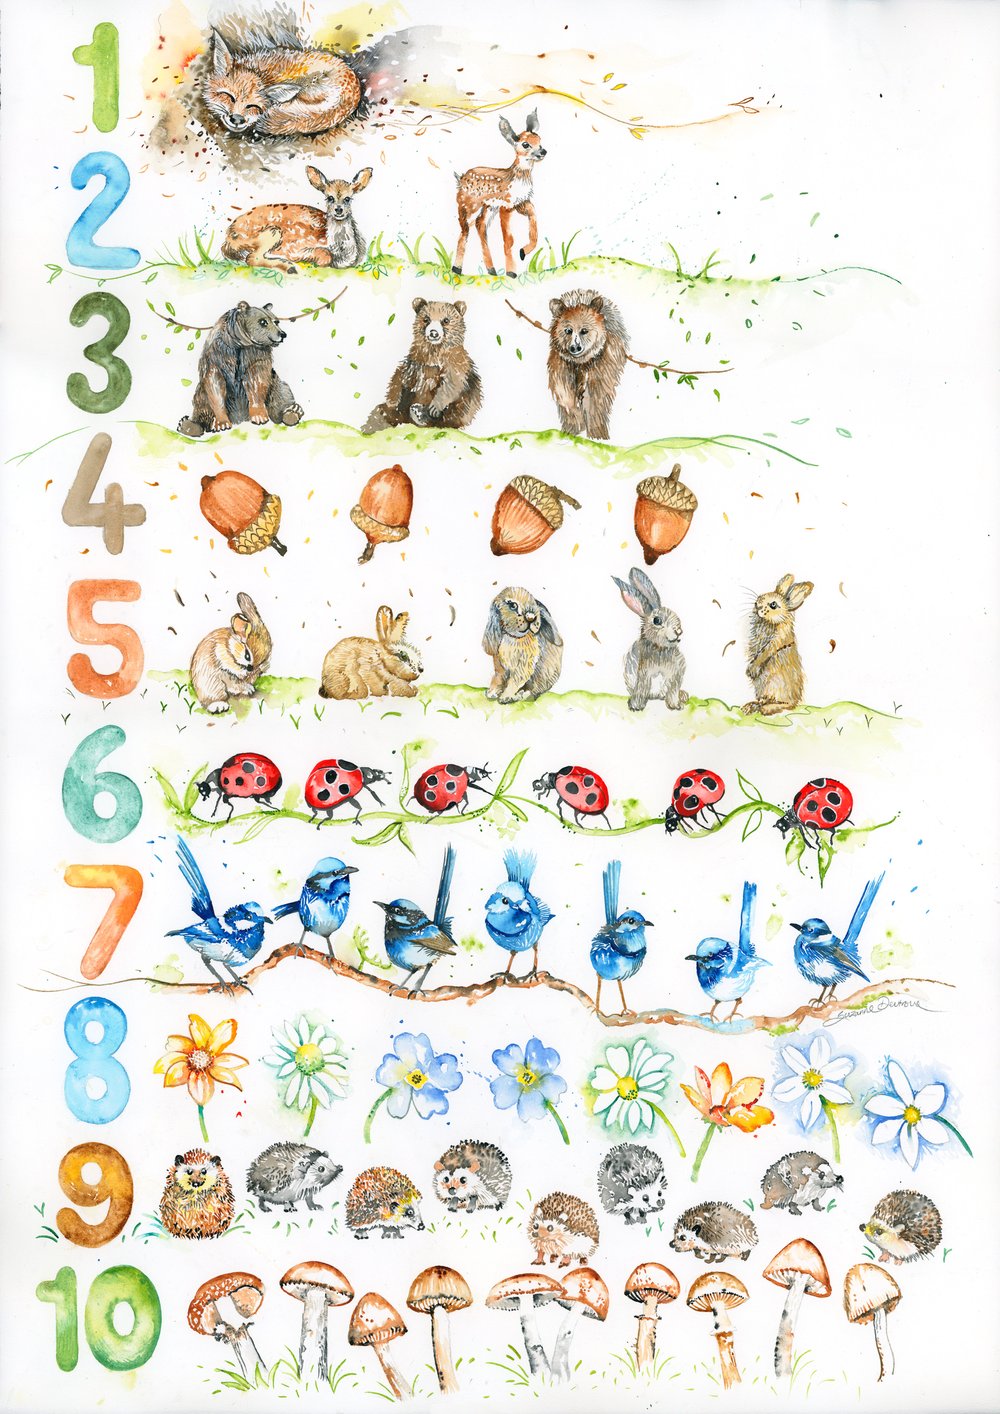 Image of 1-10 woodlands counting print